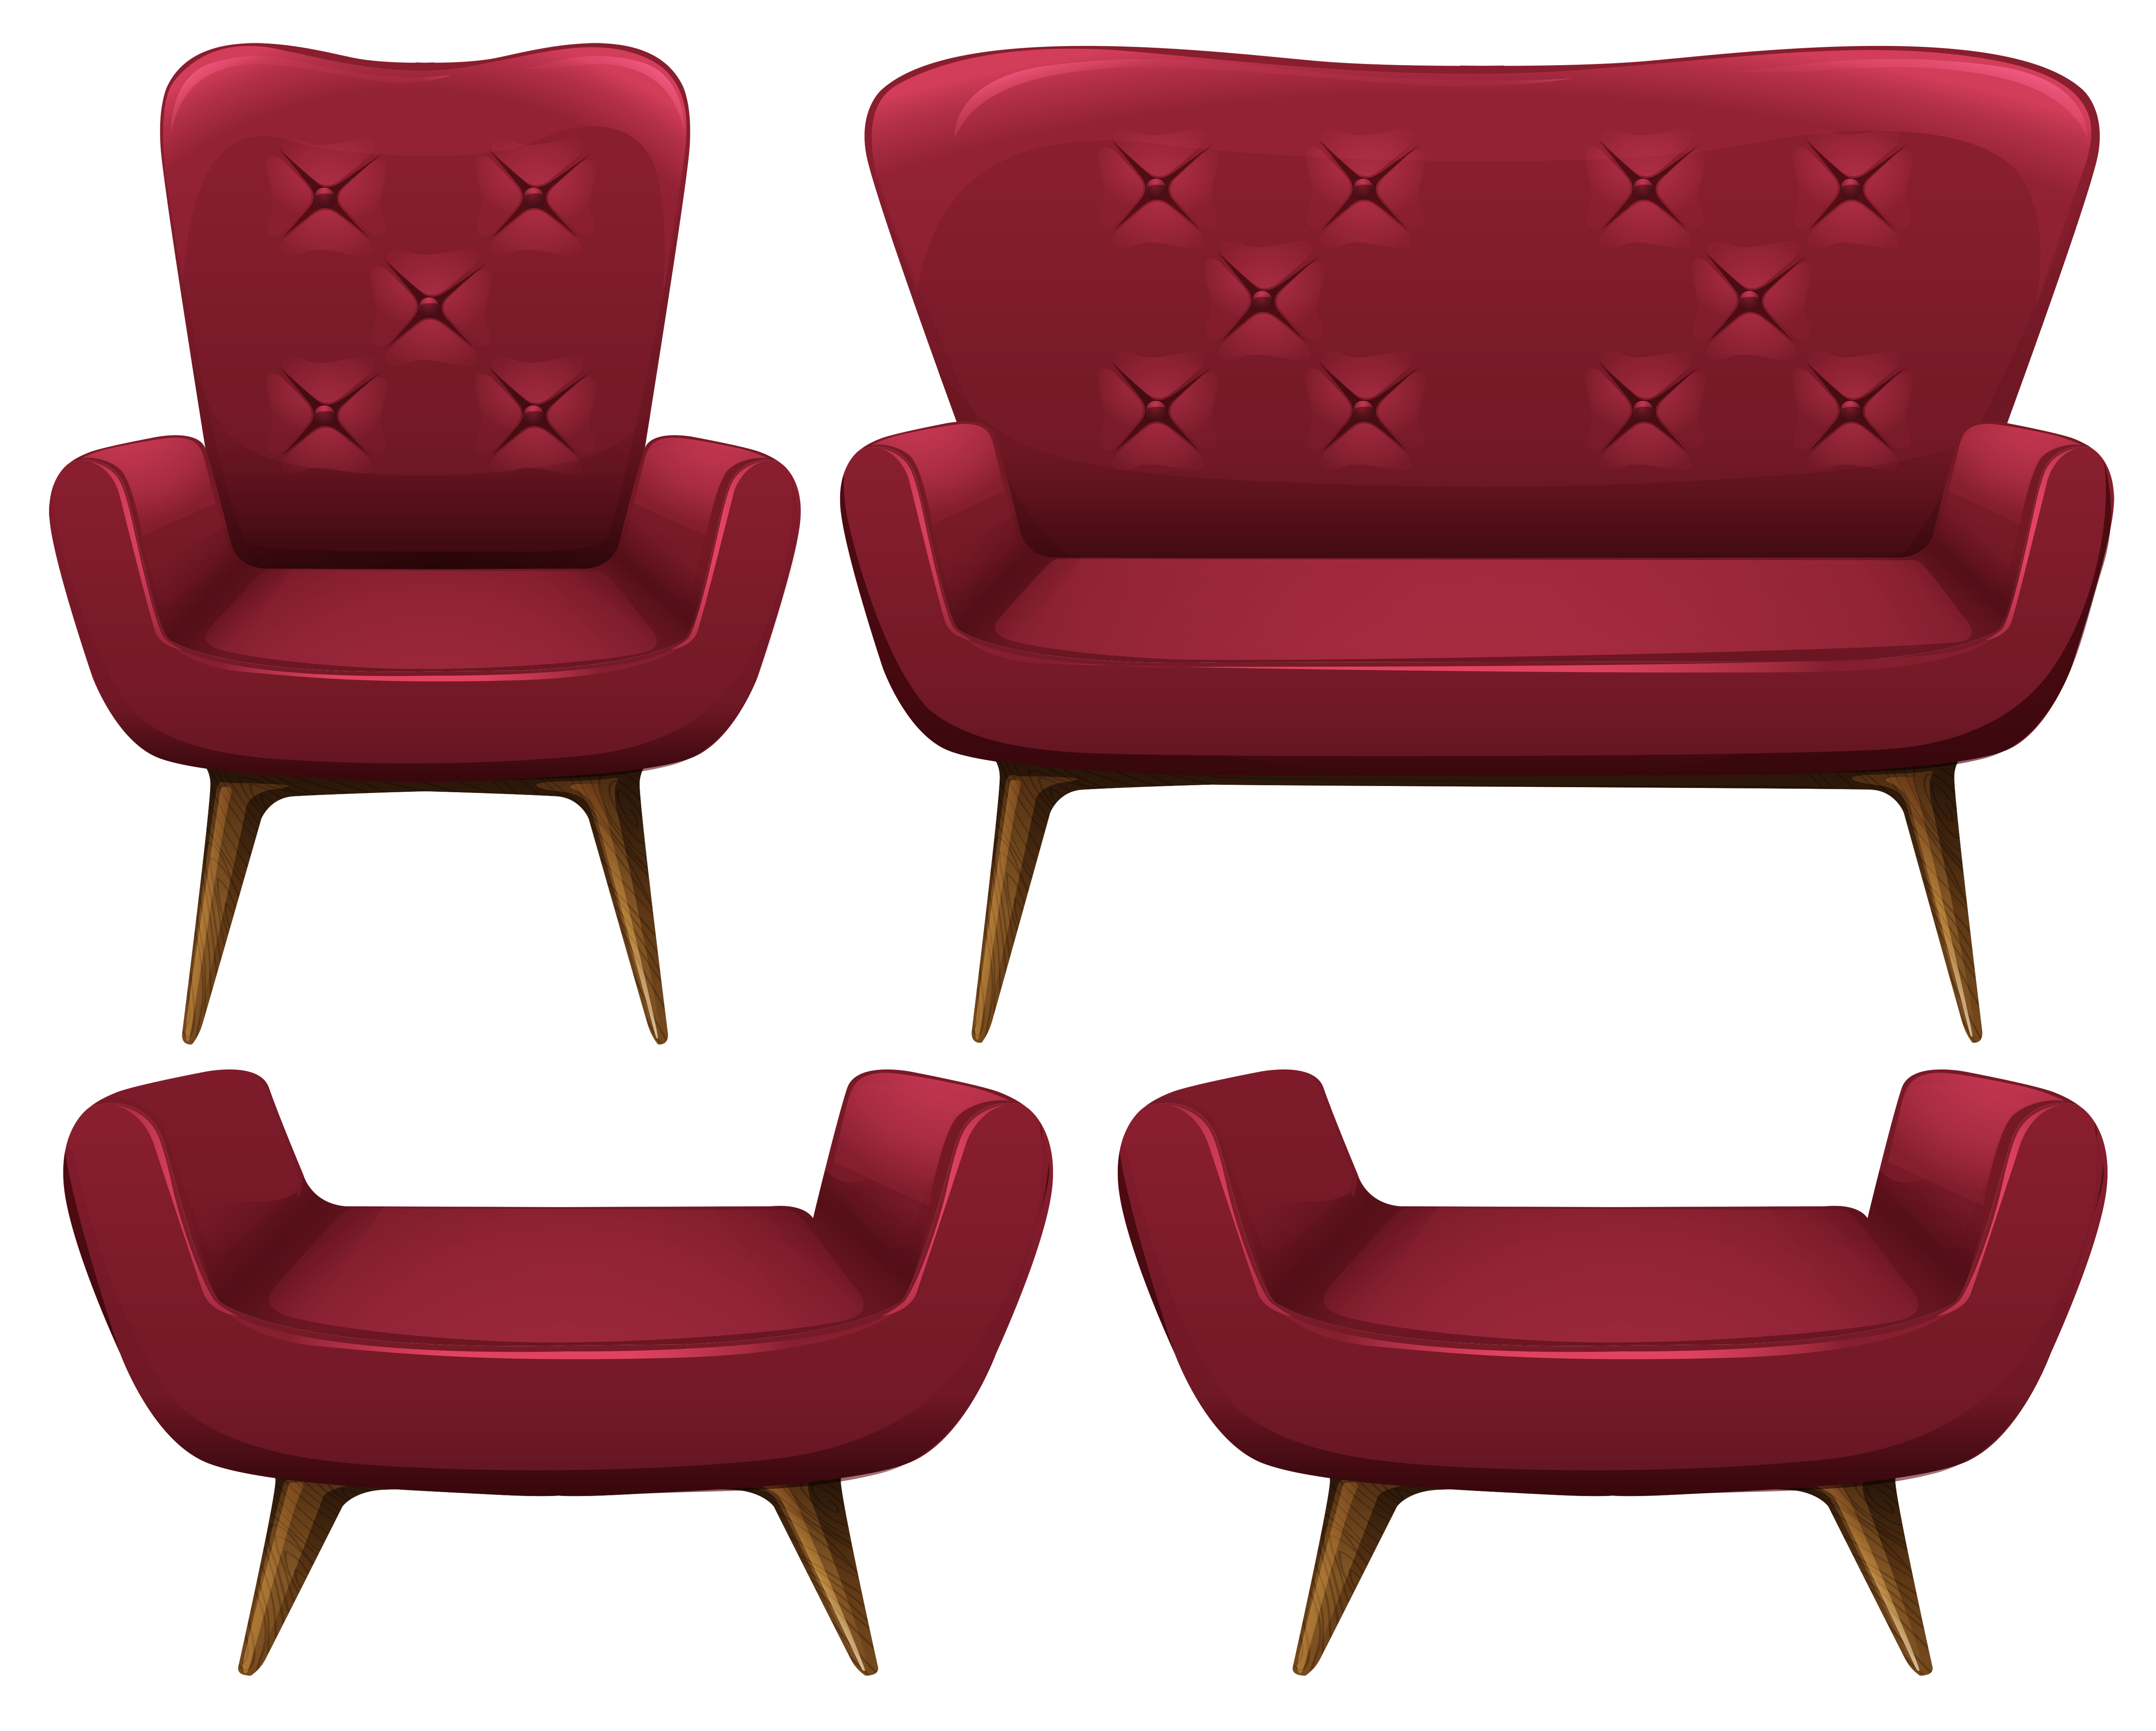 Armchairs and sofa  in red Download Free Vectors Clipart 